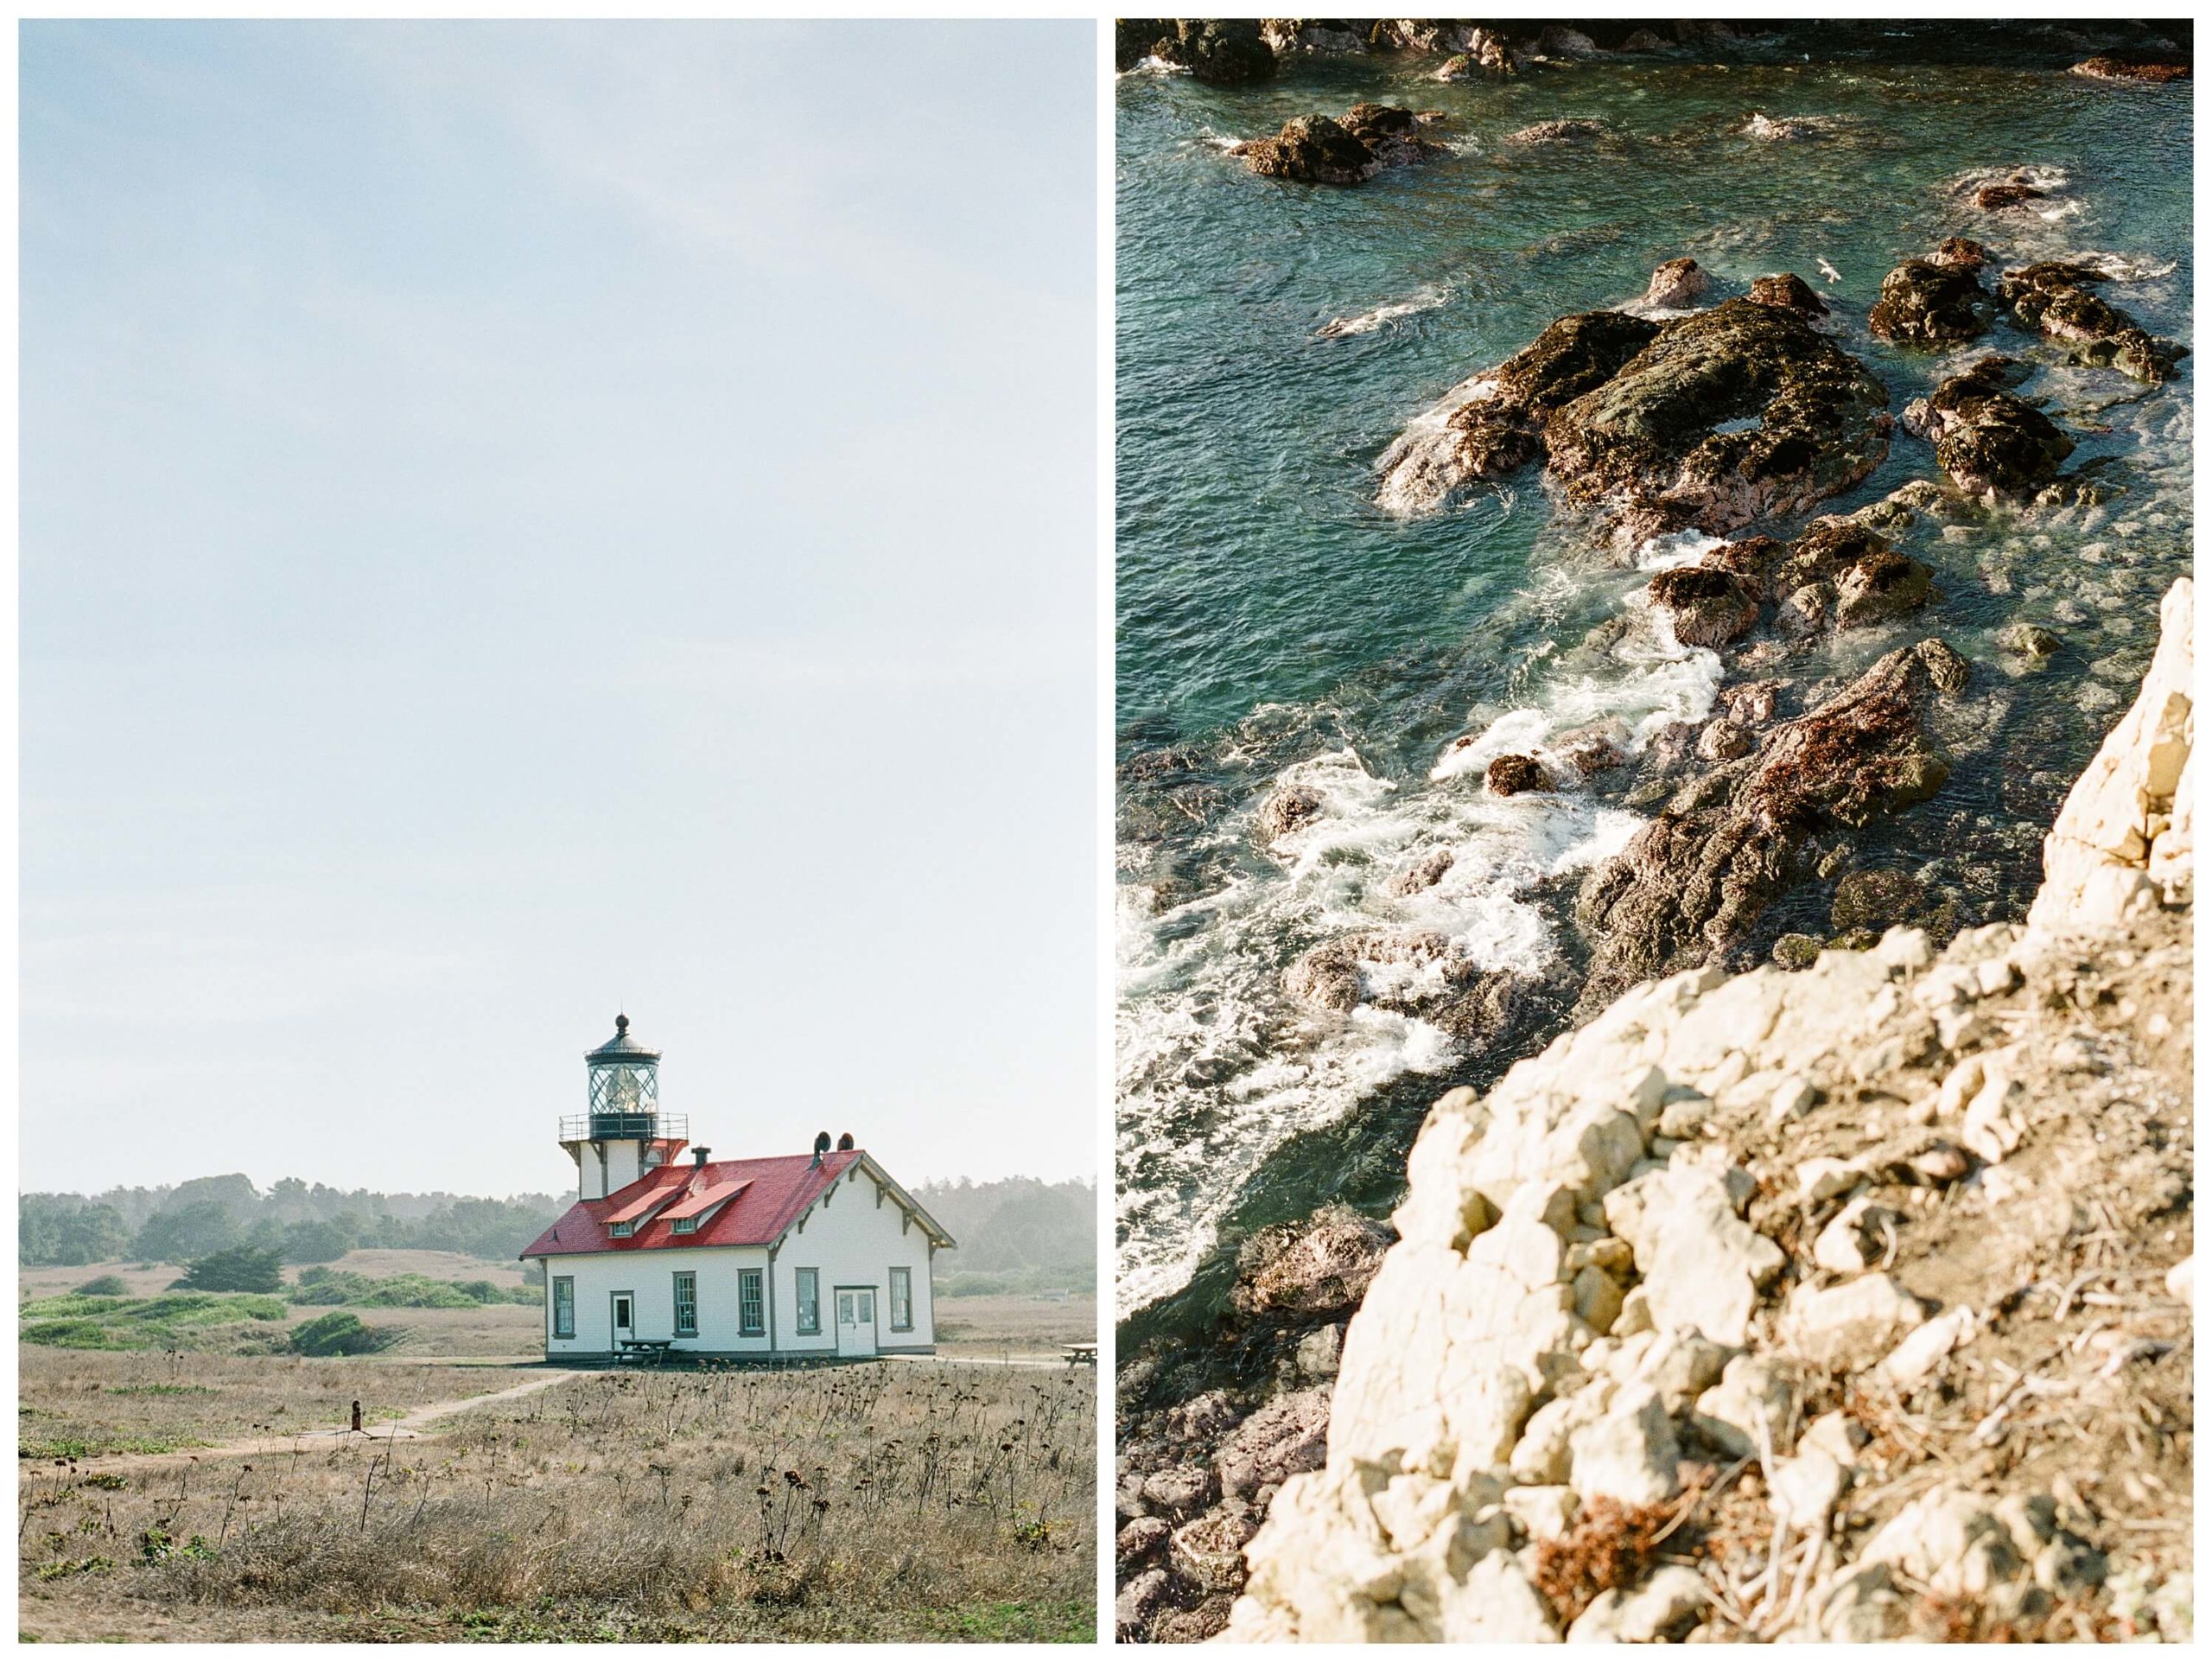 Left: The Point Cabrillo Lighthouse sits on the Mendocino coast, welcoming visitors with its red roof. Right: Turquoise waves crash on the rocks of Glass Beach in Fort Bragg.